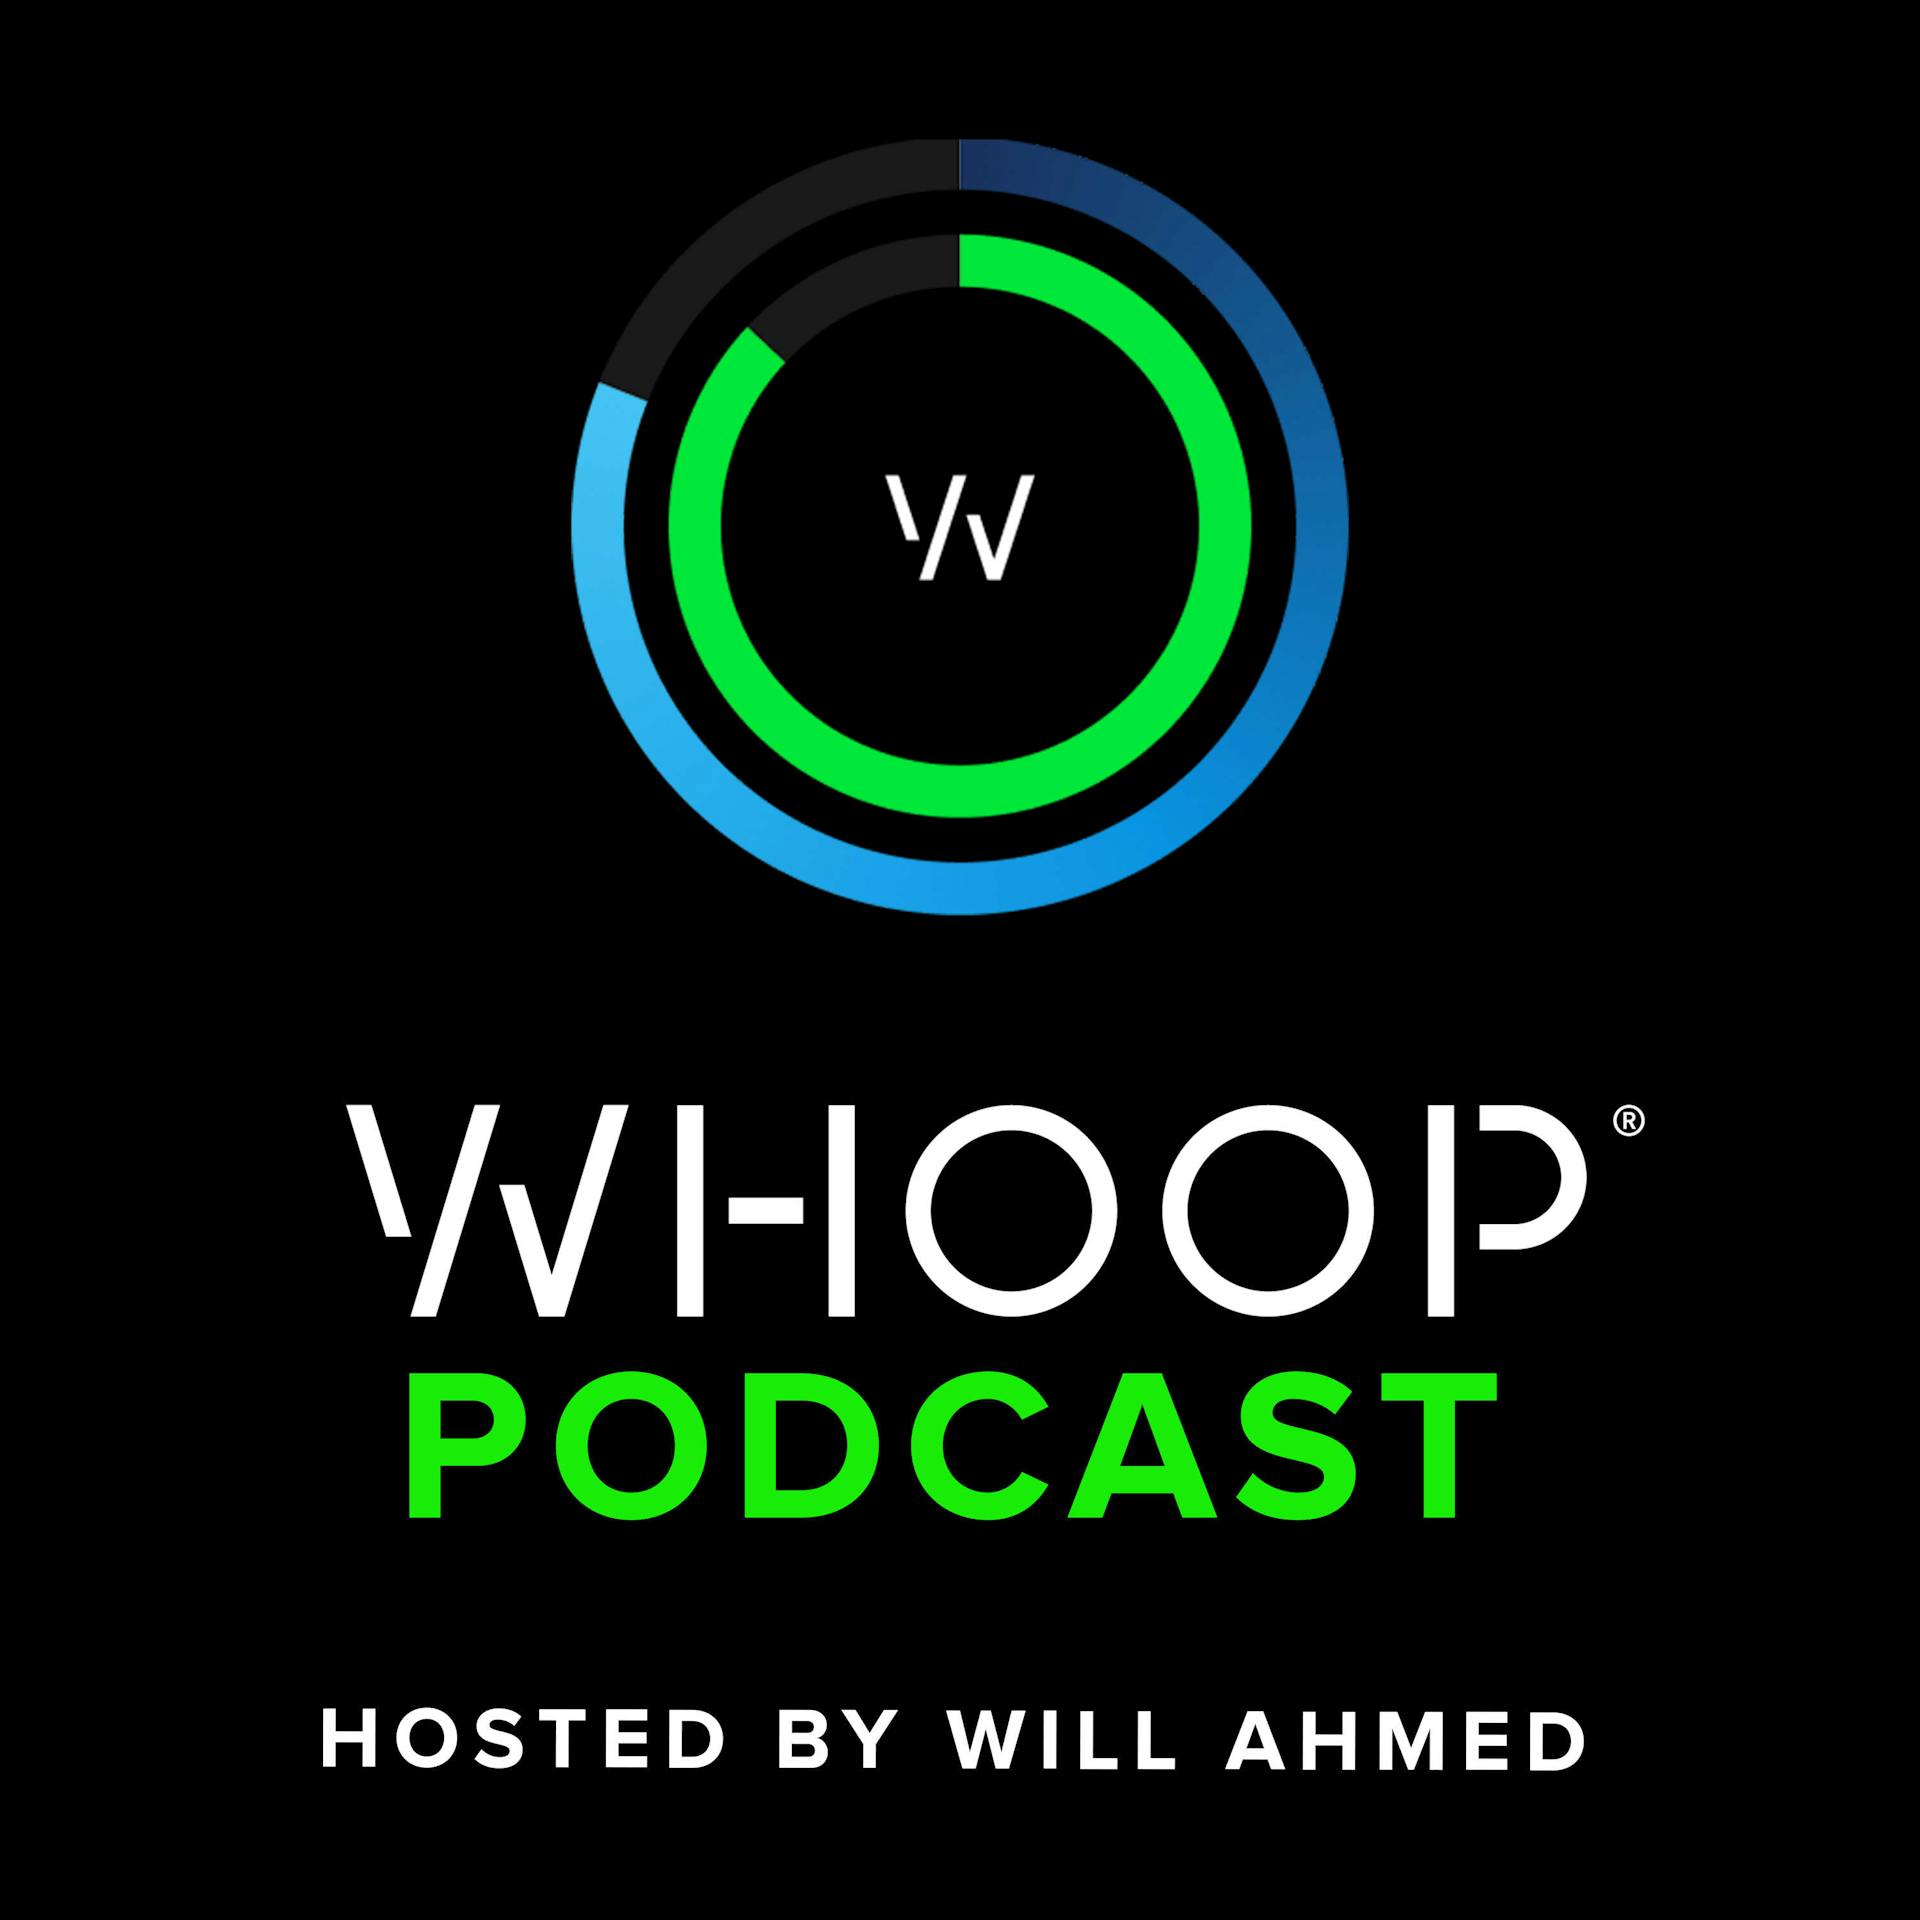 Review: WHOOP Podcast